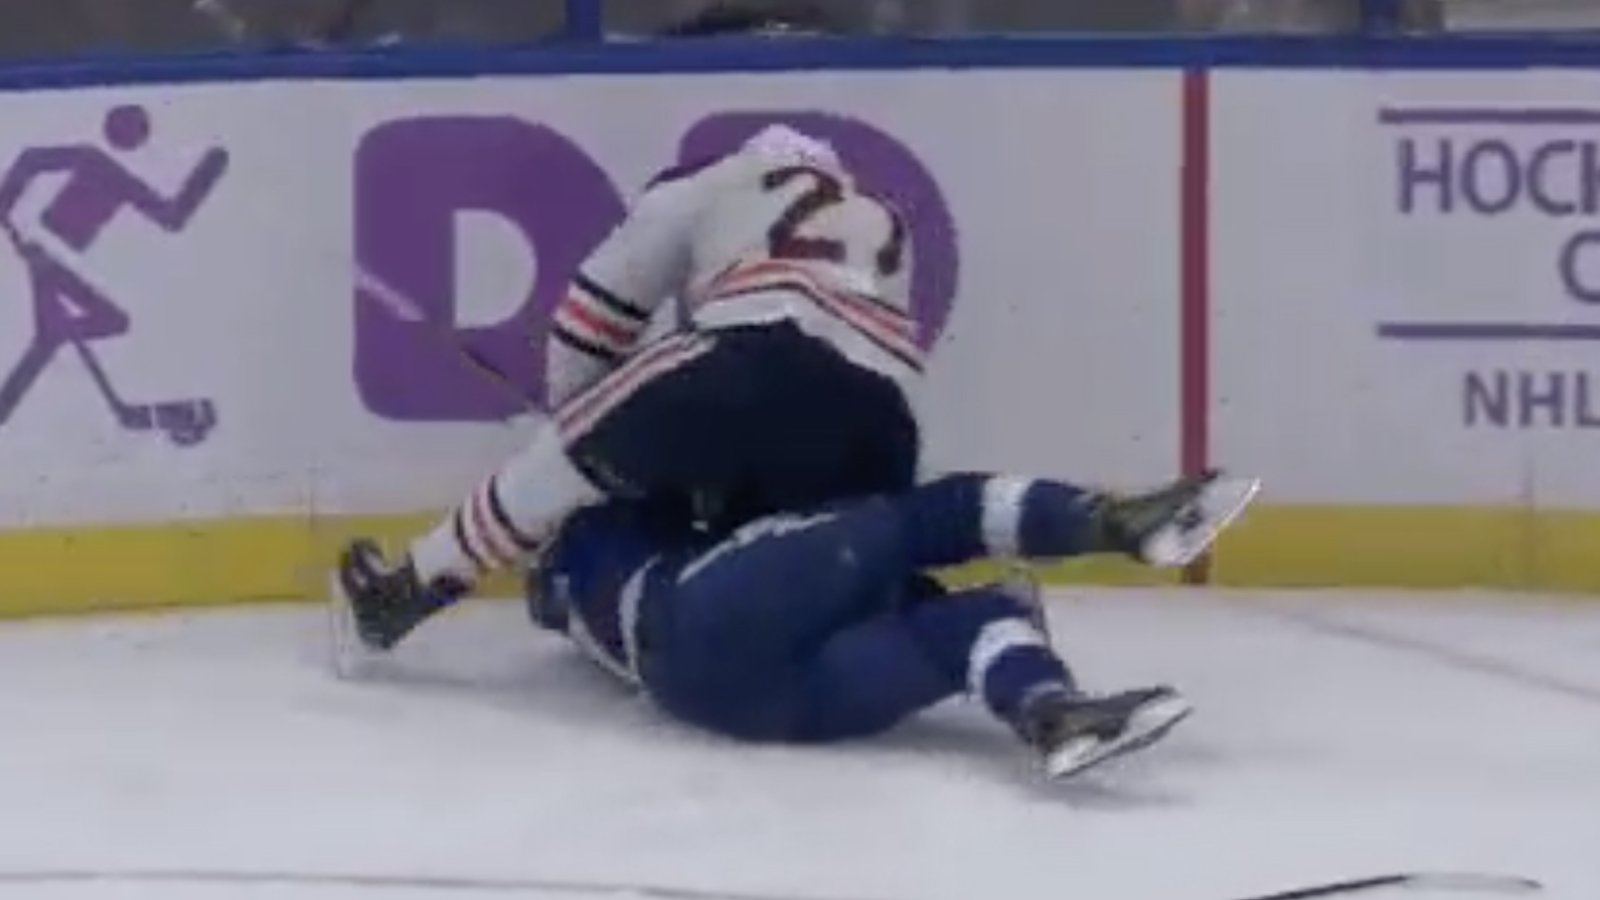 Lucic tracks down star rookie for payback and almost starts a line brawl